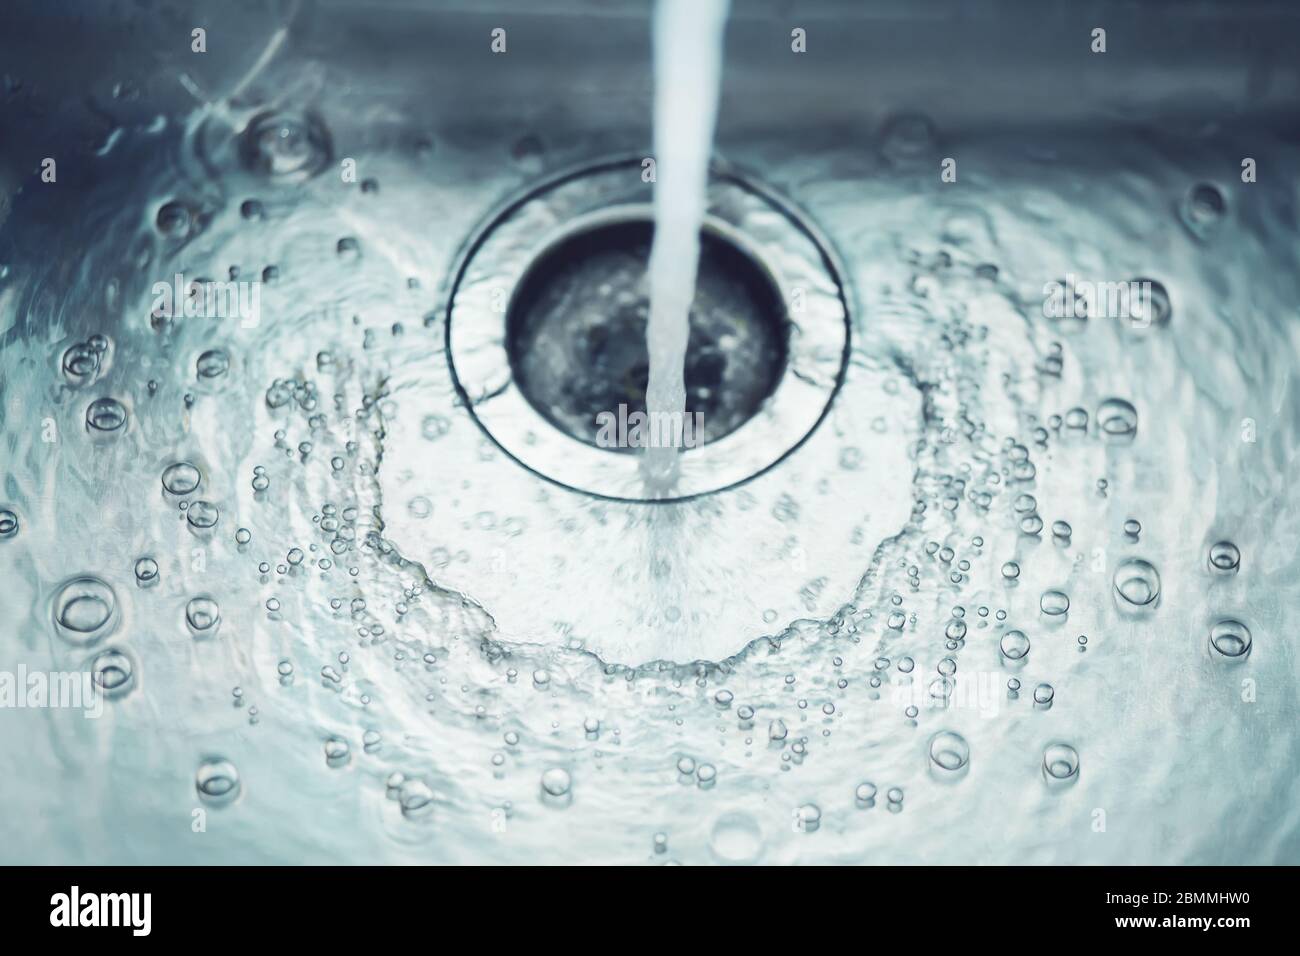 In the metal sink in the kitchen, water flows from the tap, which bubbles and flows into the drain hole. Stock Photo